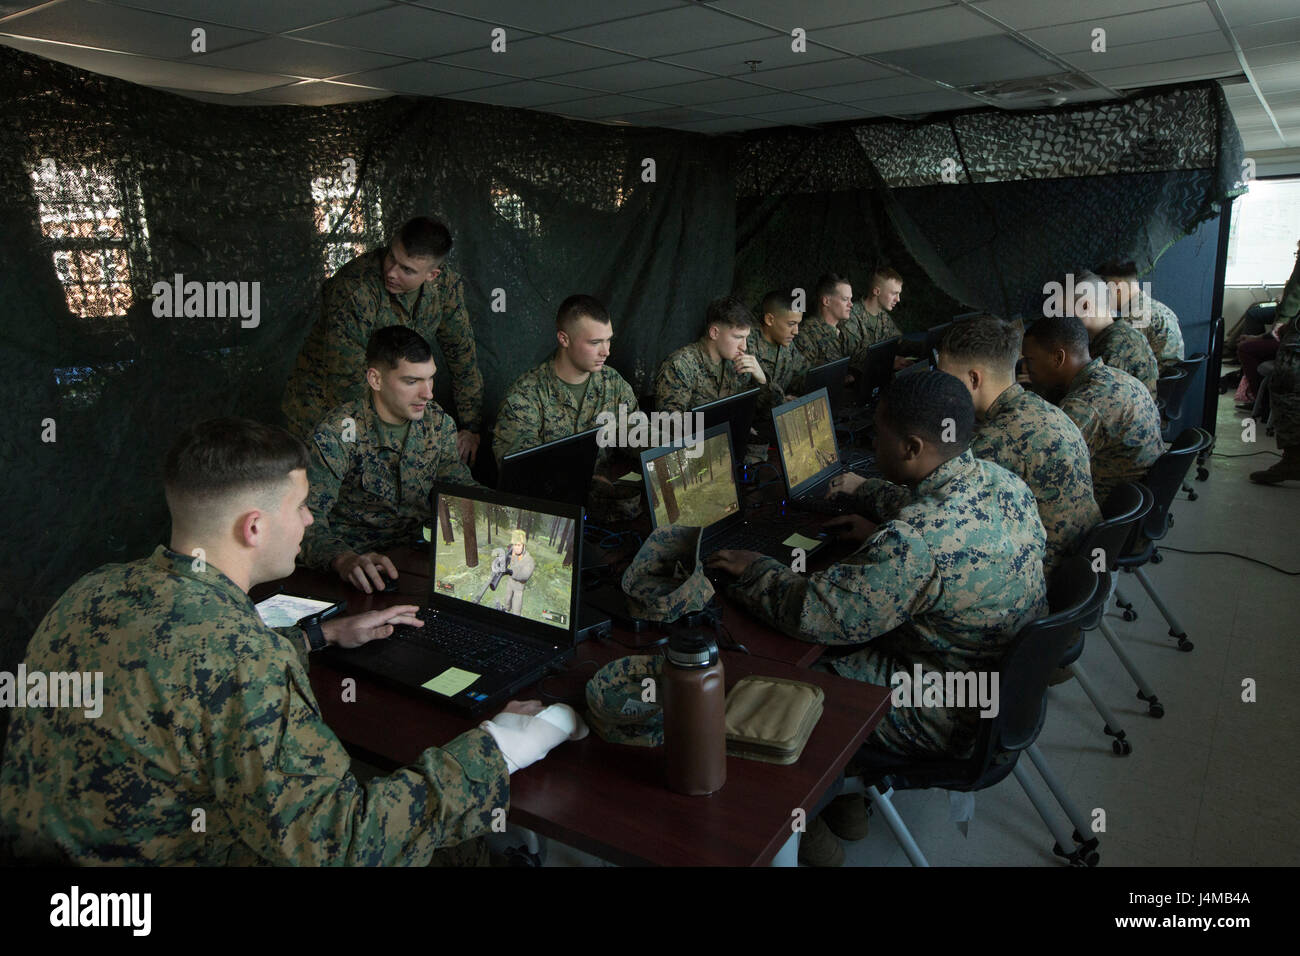 U.S. Marines with 2nd Battalion, 6th Marine Regiment, 2nd Marine Division (2d MARDIV), compete in the Spartan Tactical Games utilizing Virtual Battlespace 3 (VBS 3) on Camp Lejeune, N.C., Jan. 10, 2017. VBS 3 and the Spartan Tactical Games allow the Marines to test their tactical and cognitive thinking while competing against each other on a squad level. (U.S. Marine Corps photo by Lance Cpl. Tojyea Matally) Stock Photo